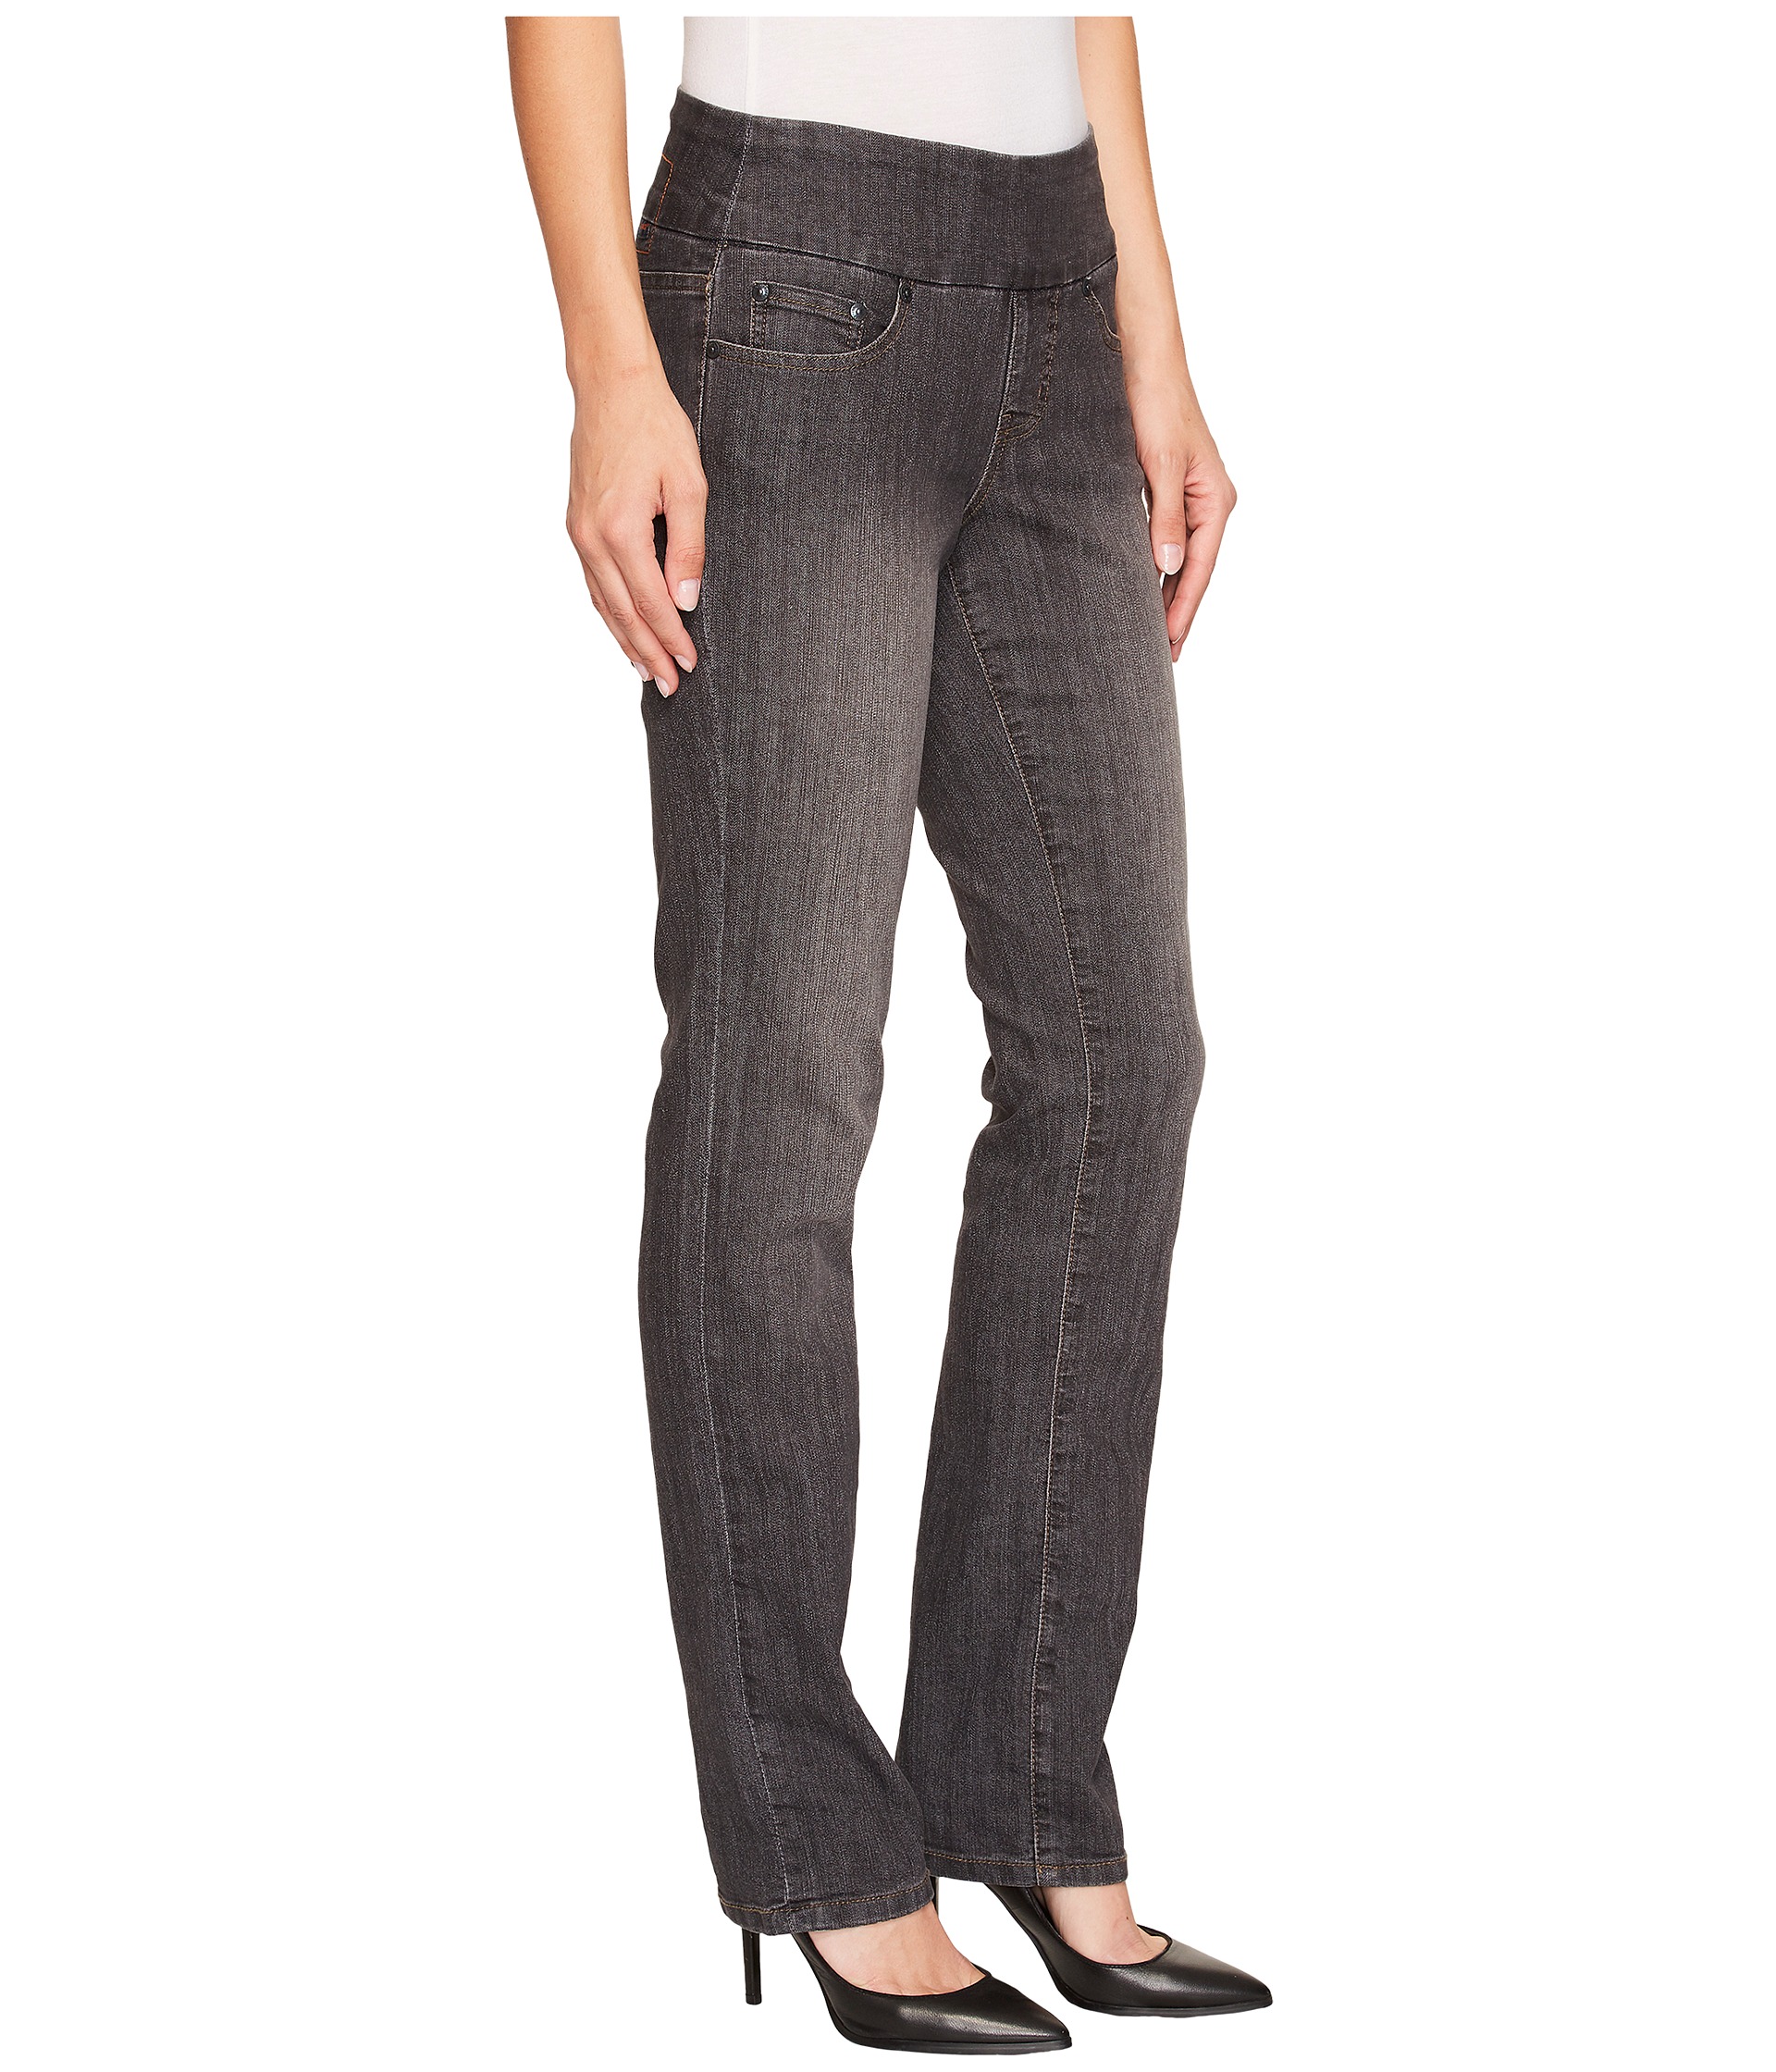 Jag Jeans Peri Pull-On Straight in Thunder Grey at Zappos.com